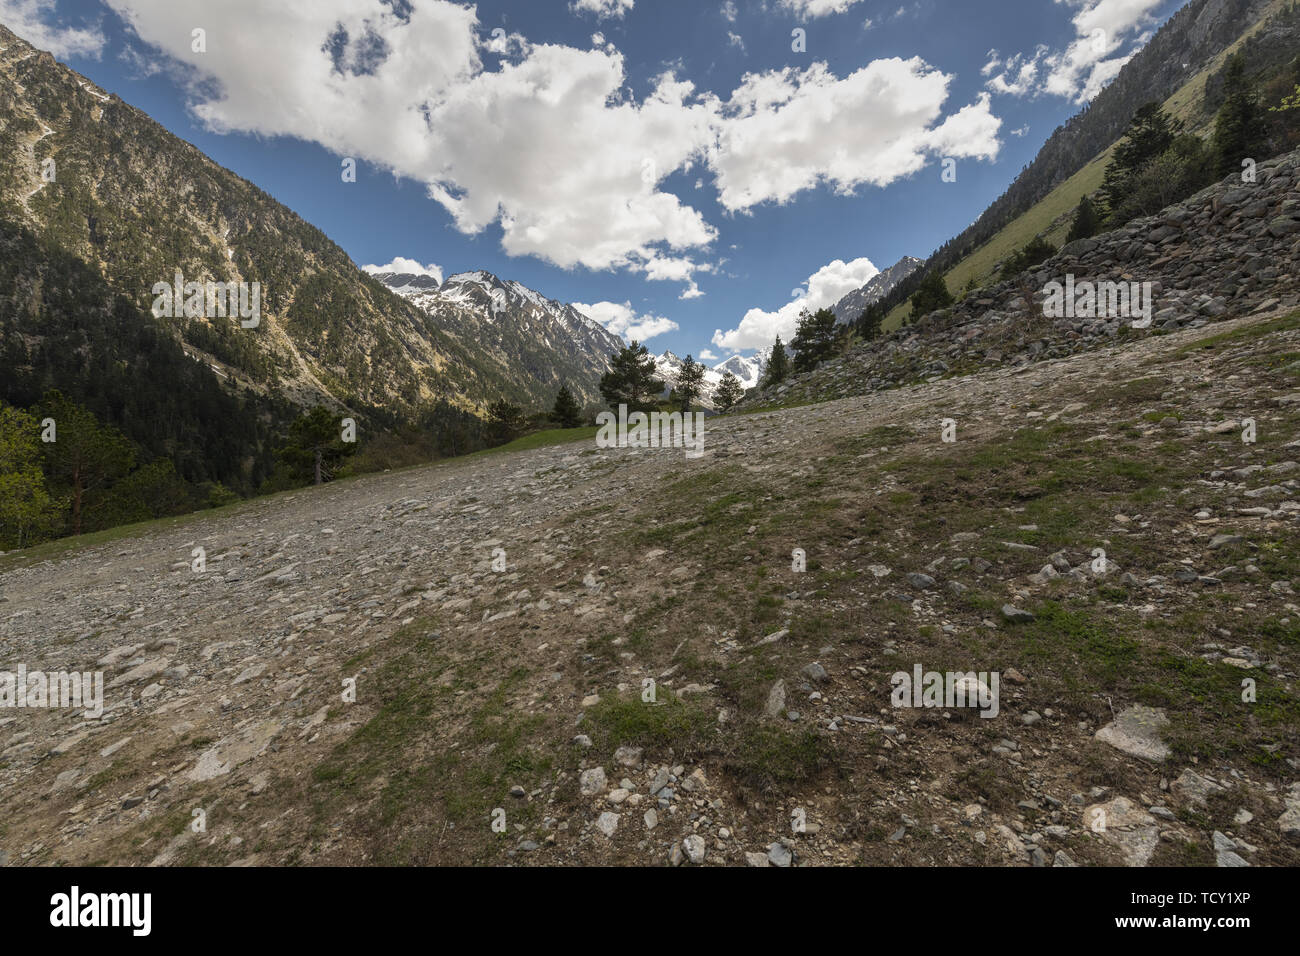 Europe, France, High Mountains, 2019-06, One the many ski slopes leading to the Gaube Lake in the French Pyrenees mountains during Summer.  The area i Stock Photo